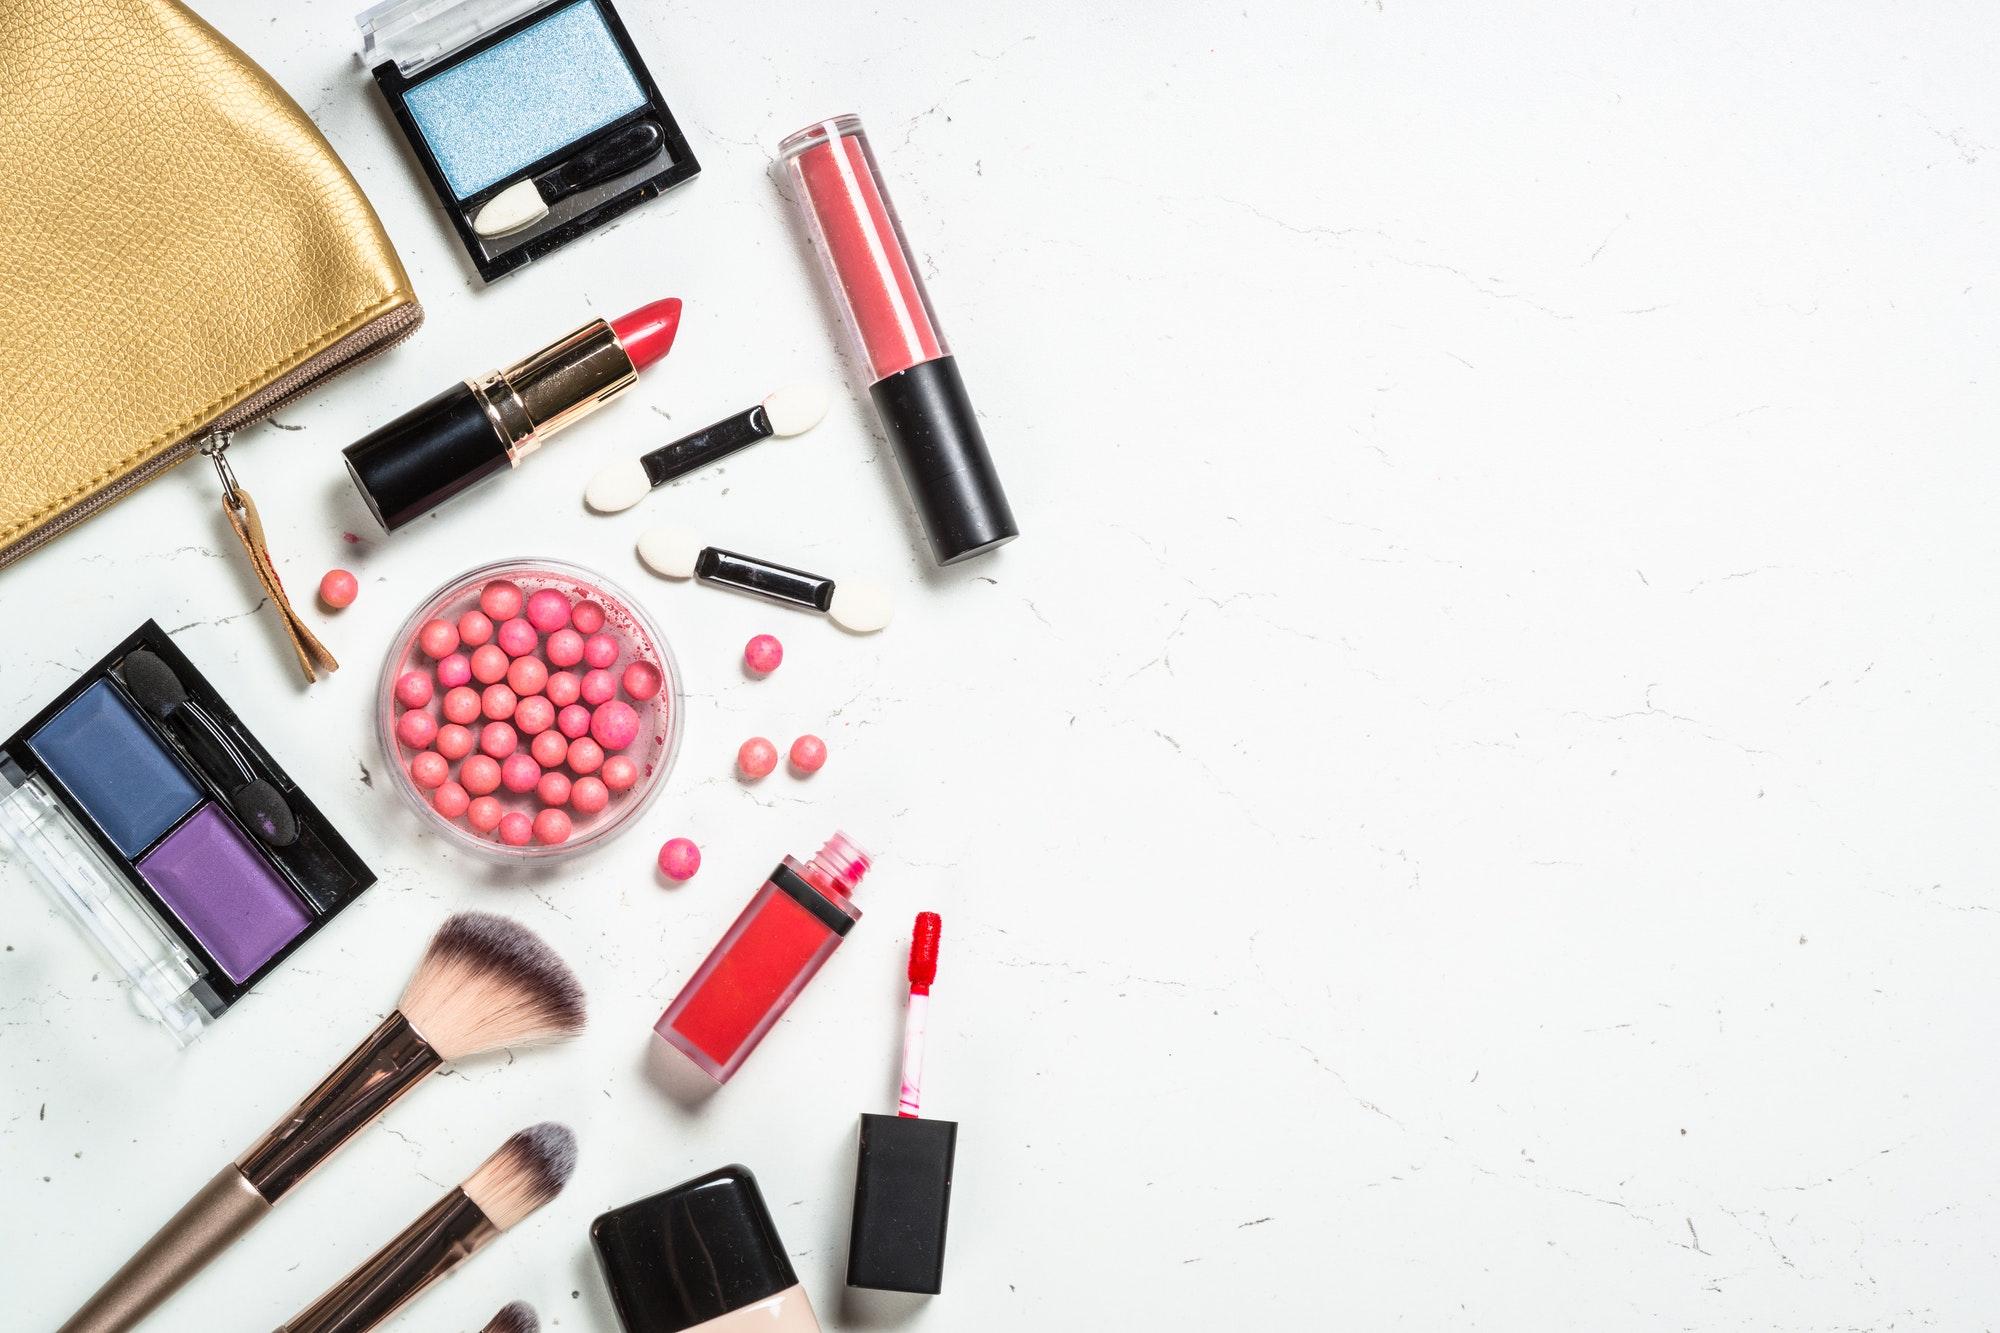 Make up products at white background.